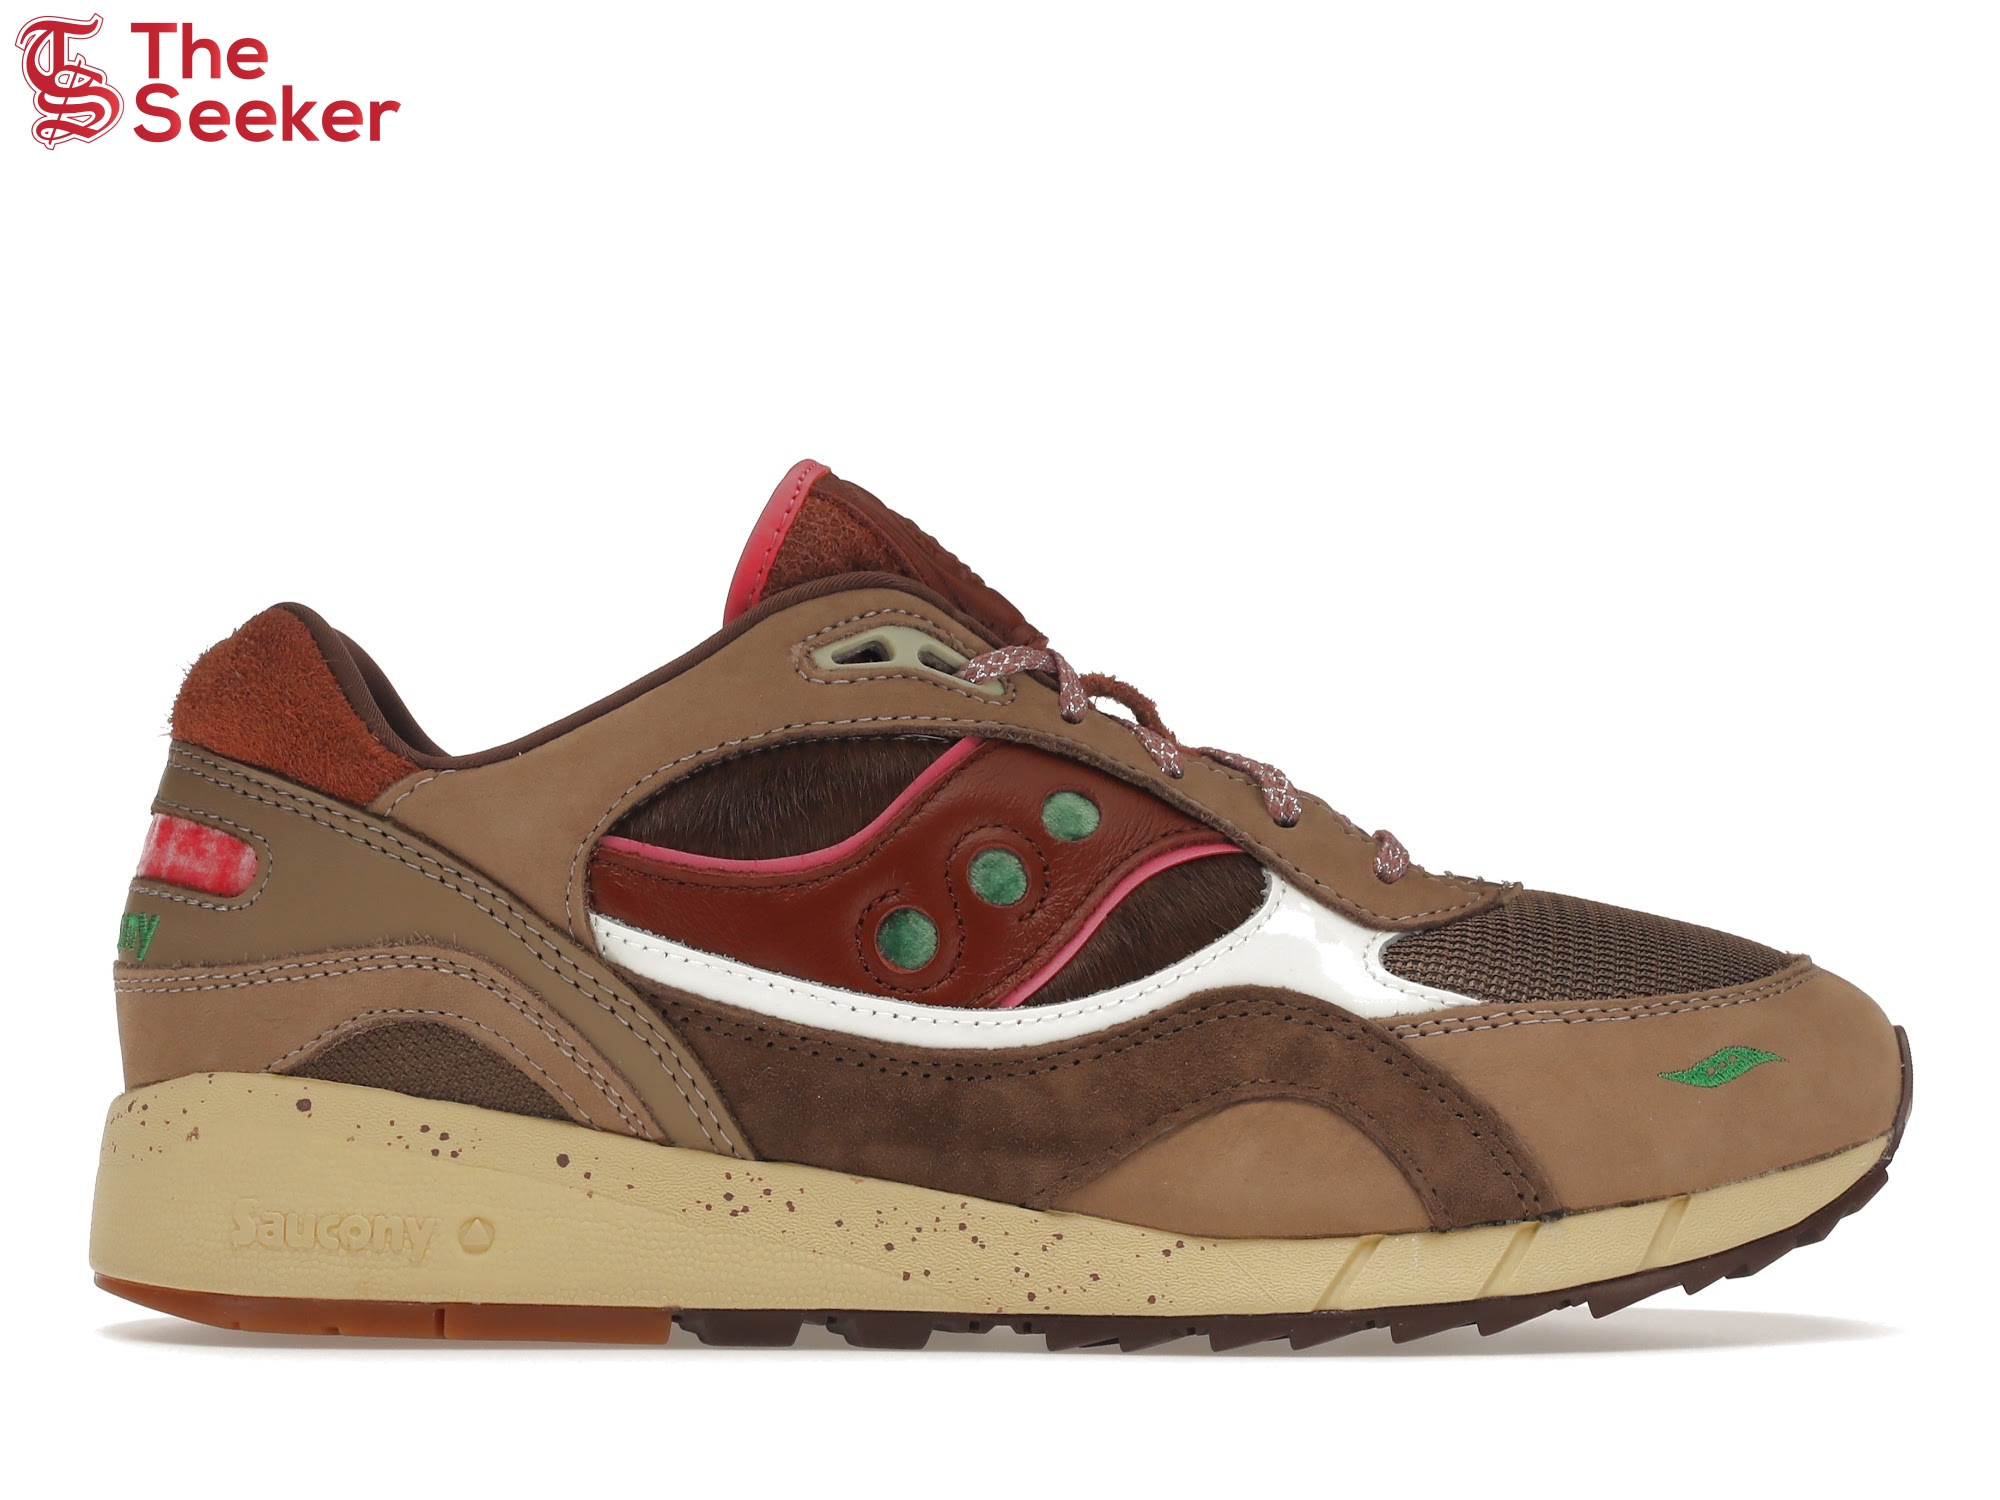 Saucony Shadow 6000 Feature Chocolate Chip